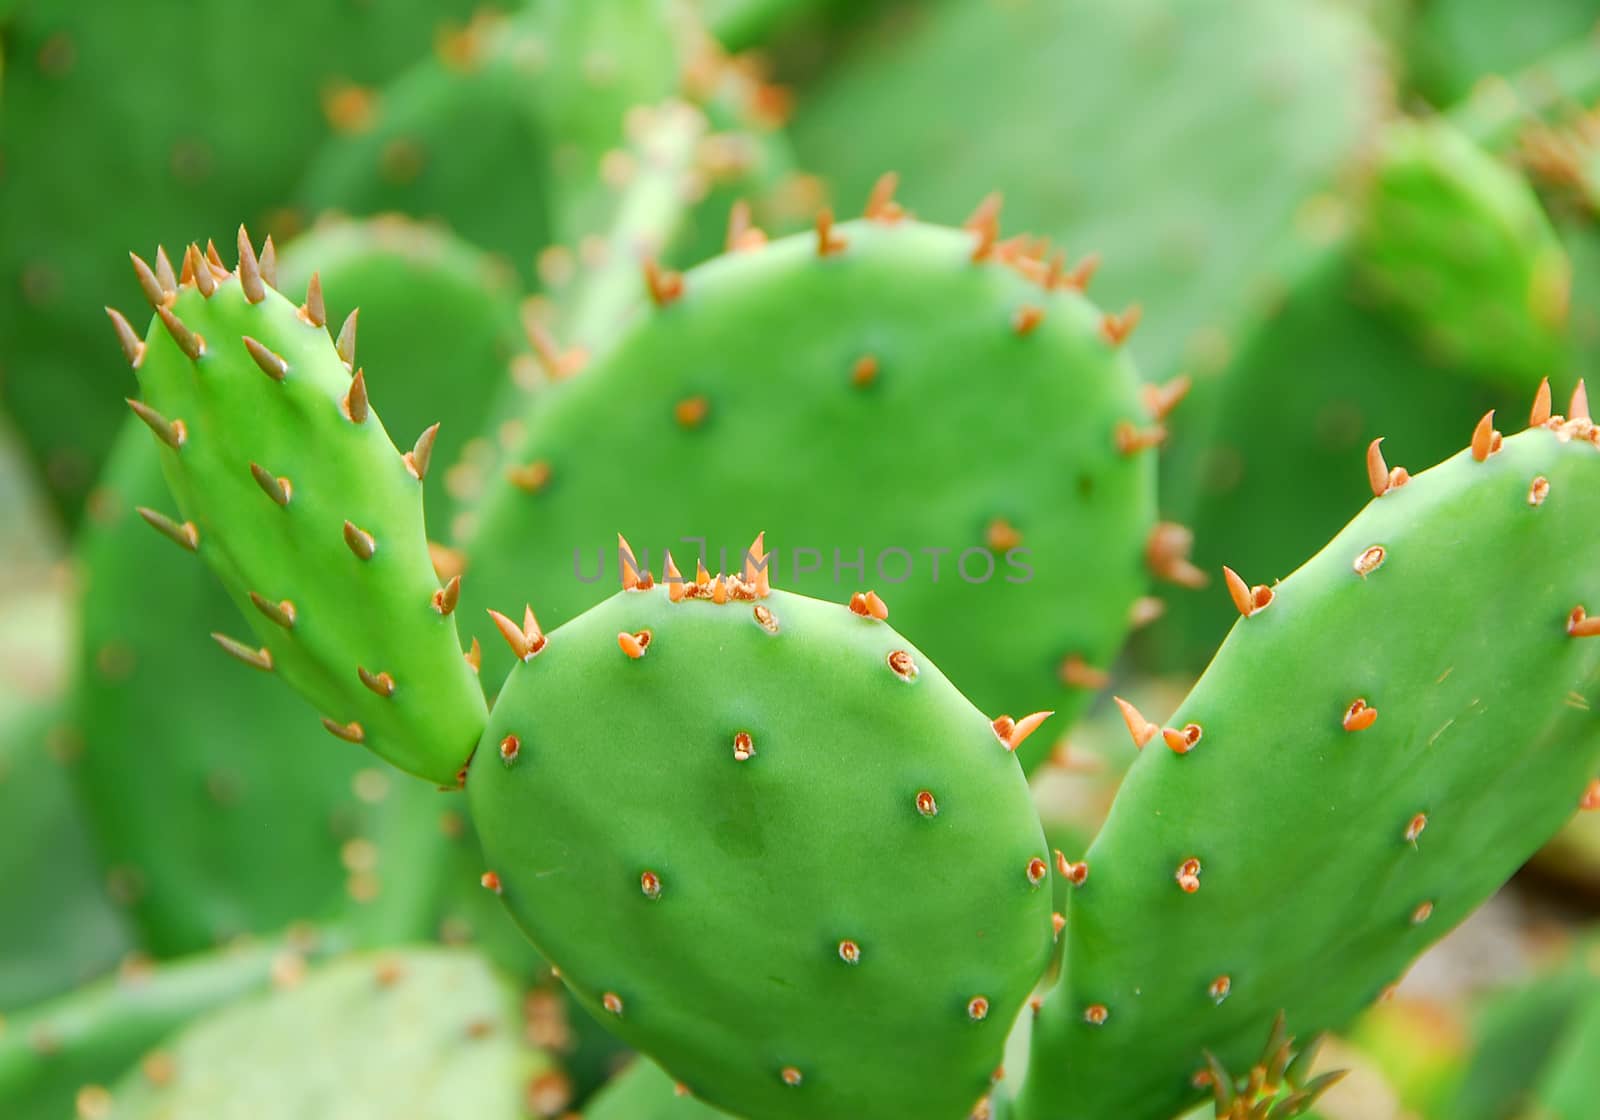 closeup of green cactus plant with sharp thorns